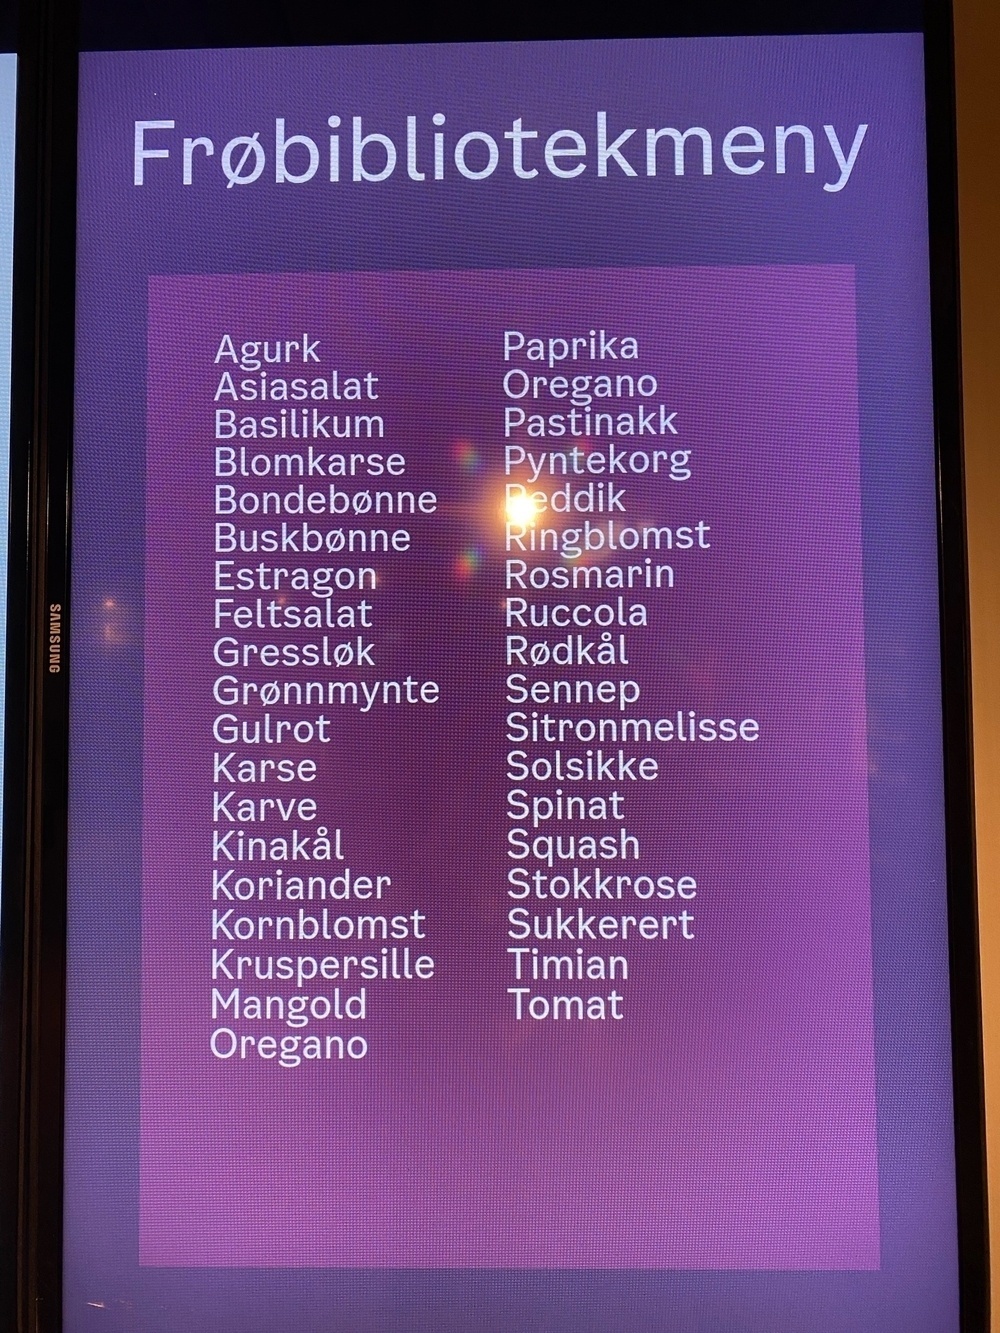 An info-screen with the names of different vegetable- and flower seeds.